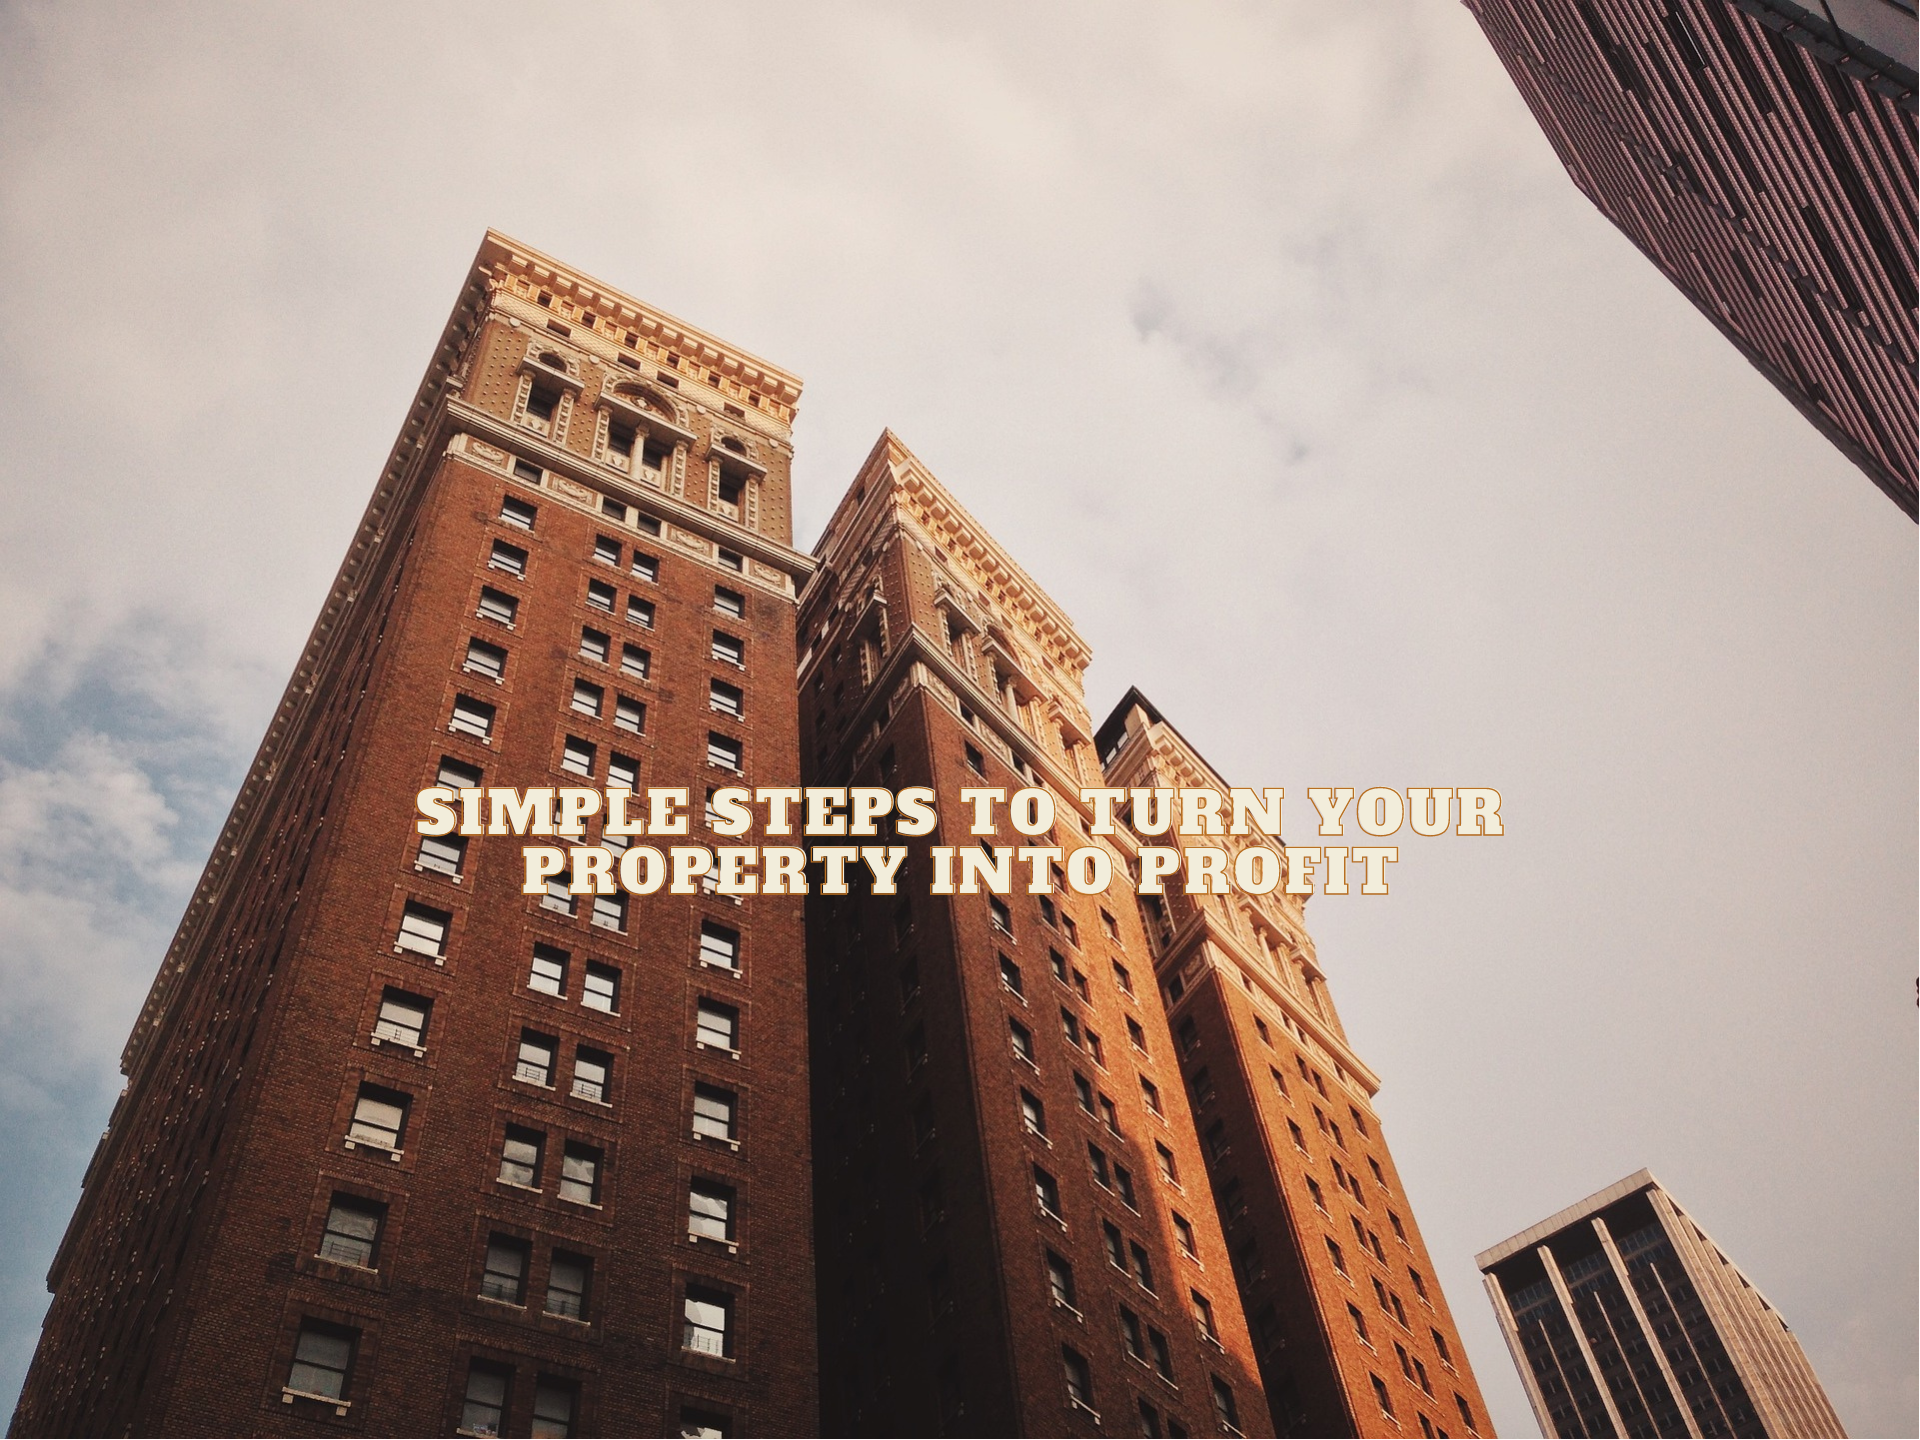 Simple Steps to Turn Your Property into Profit